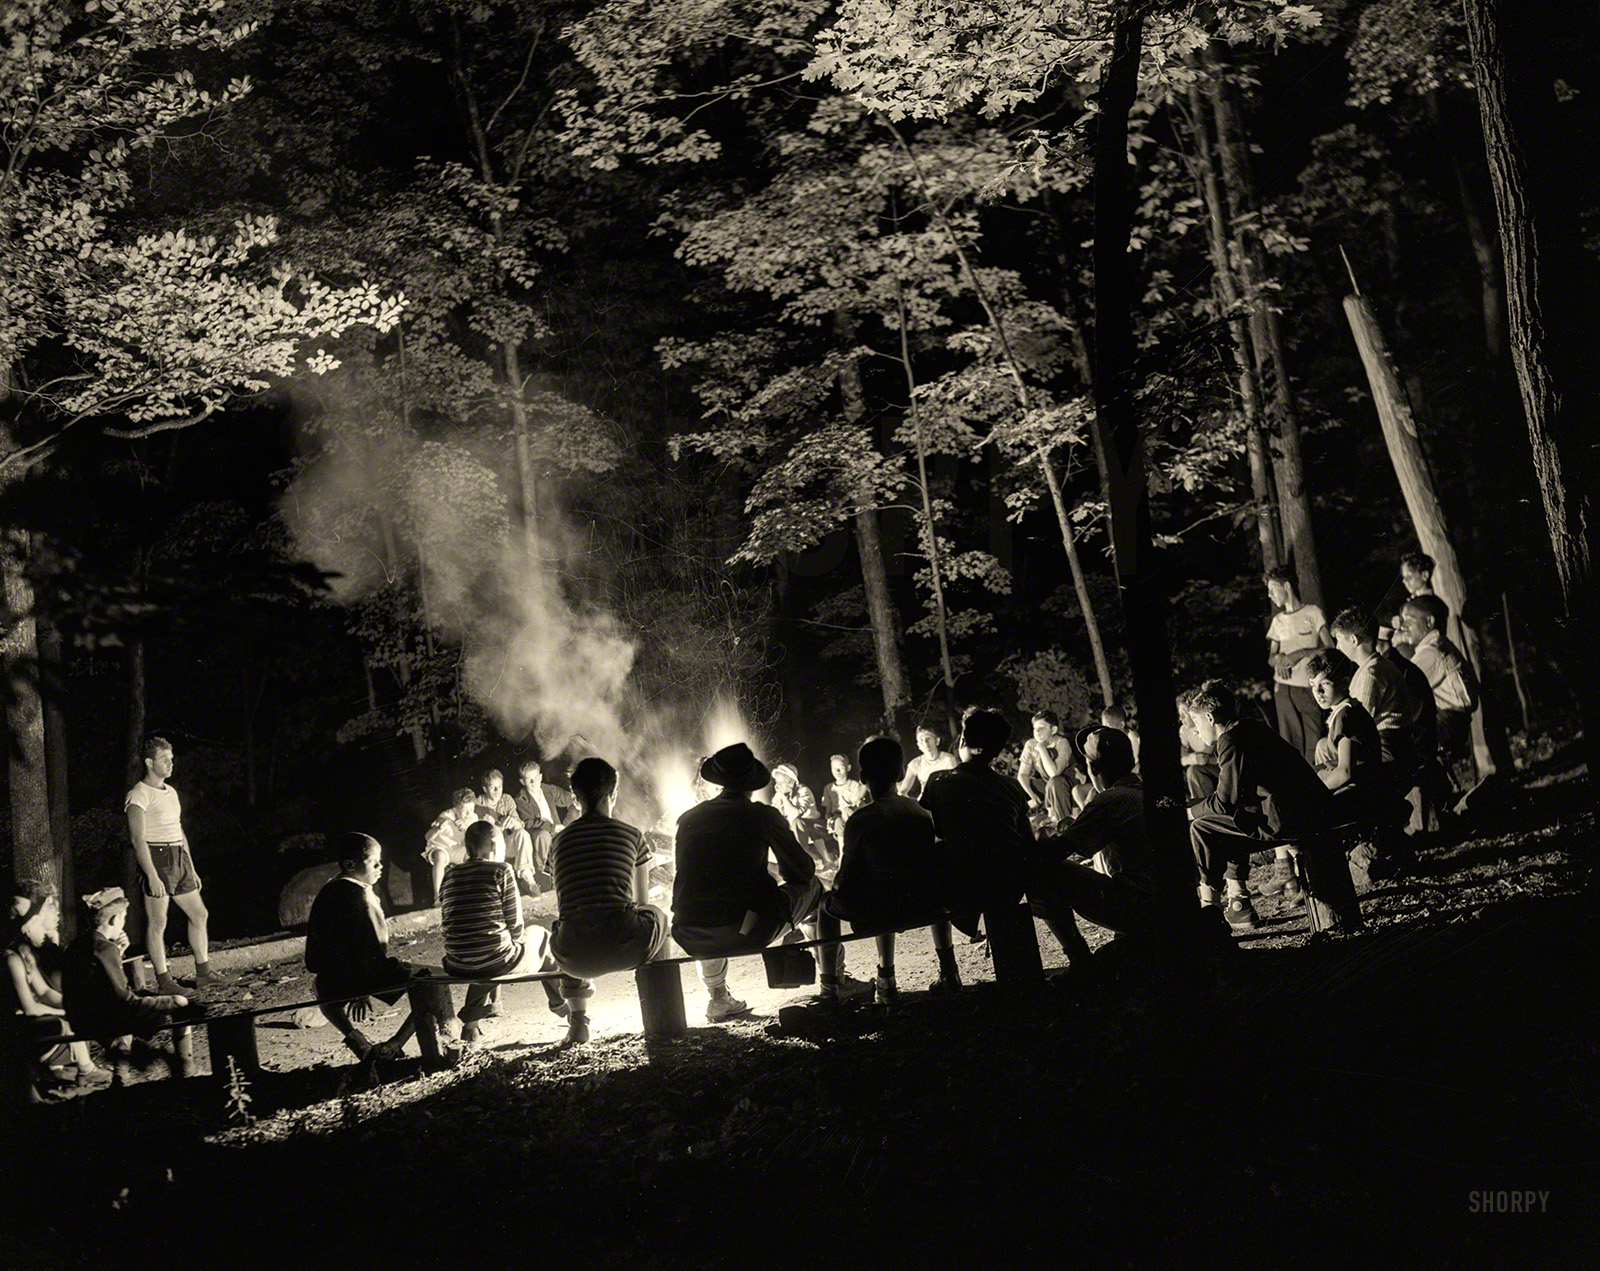 August 1943. Southfields, New York. "Interracial activities at Camp Nathan Hale, where children are aided by the Methodist Camp Service. Singing around the campfire." Photo by Gordon Parks, Office of War Information. View full size.